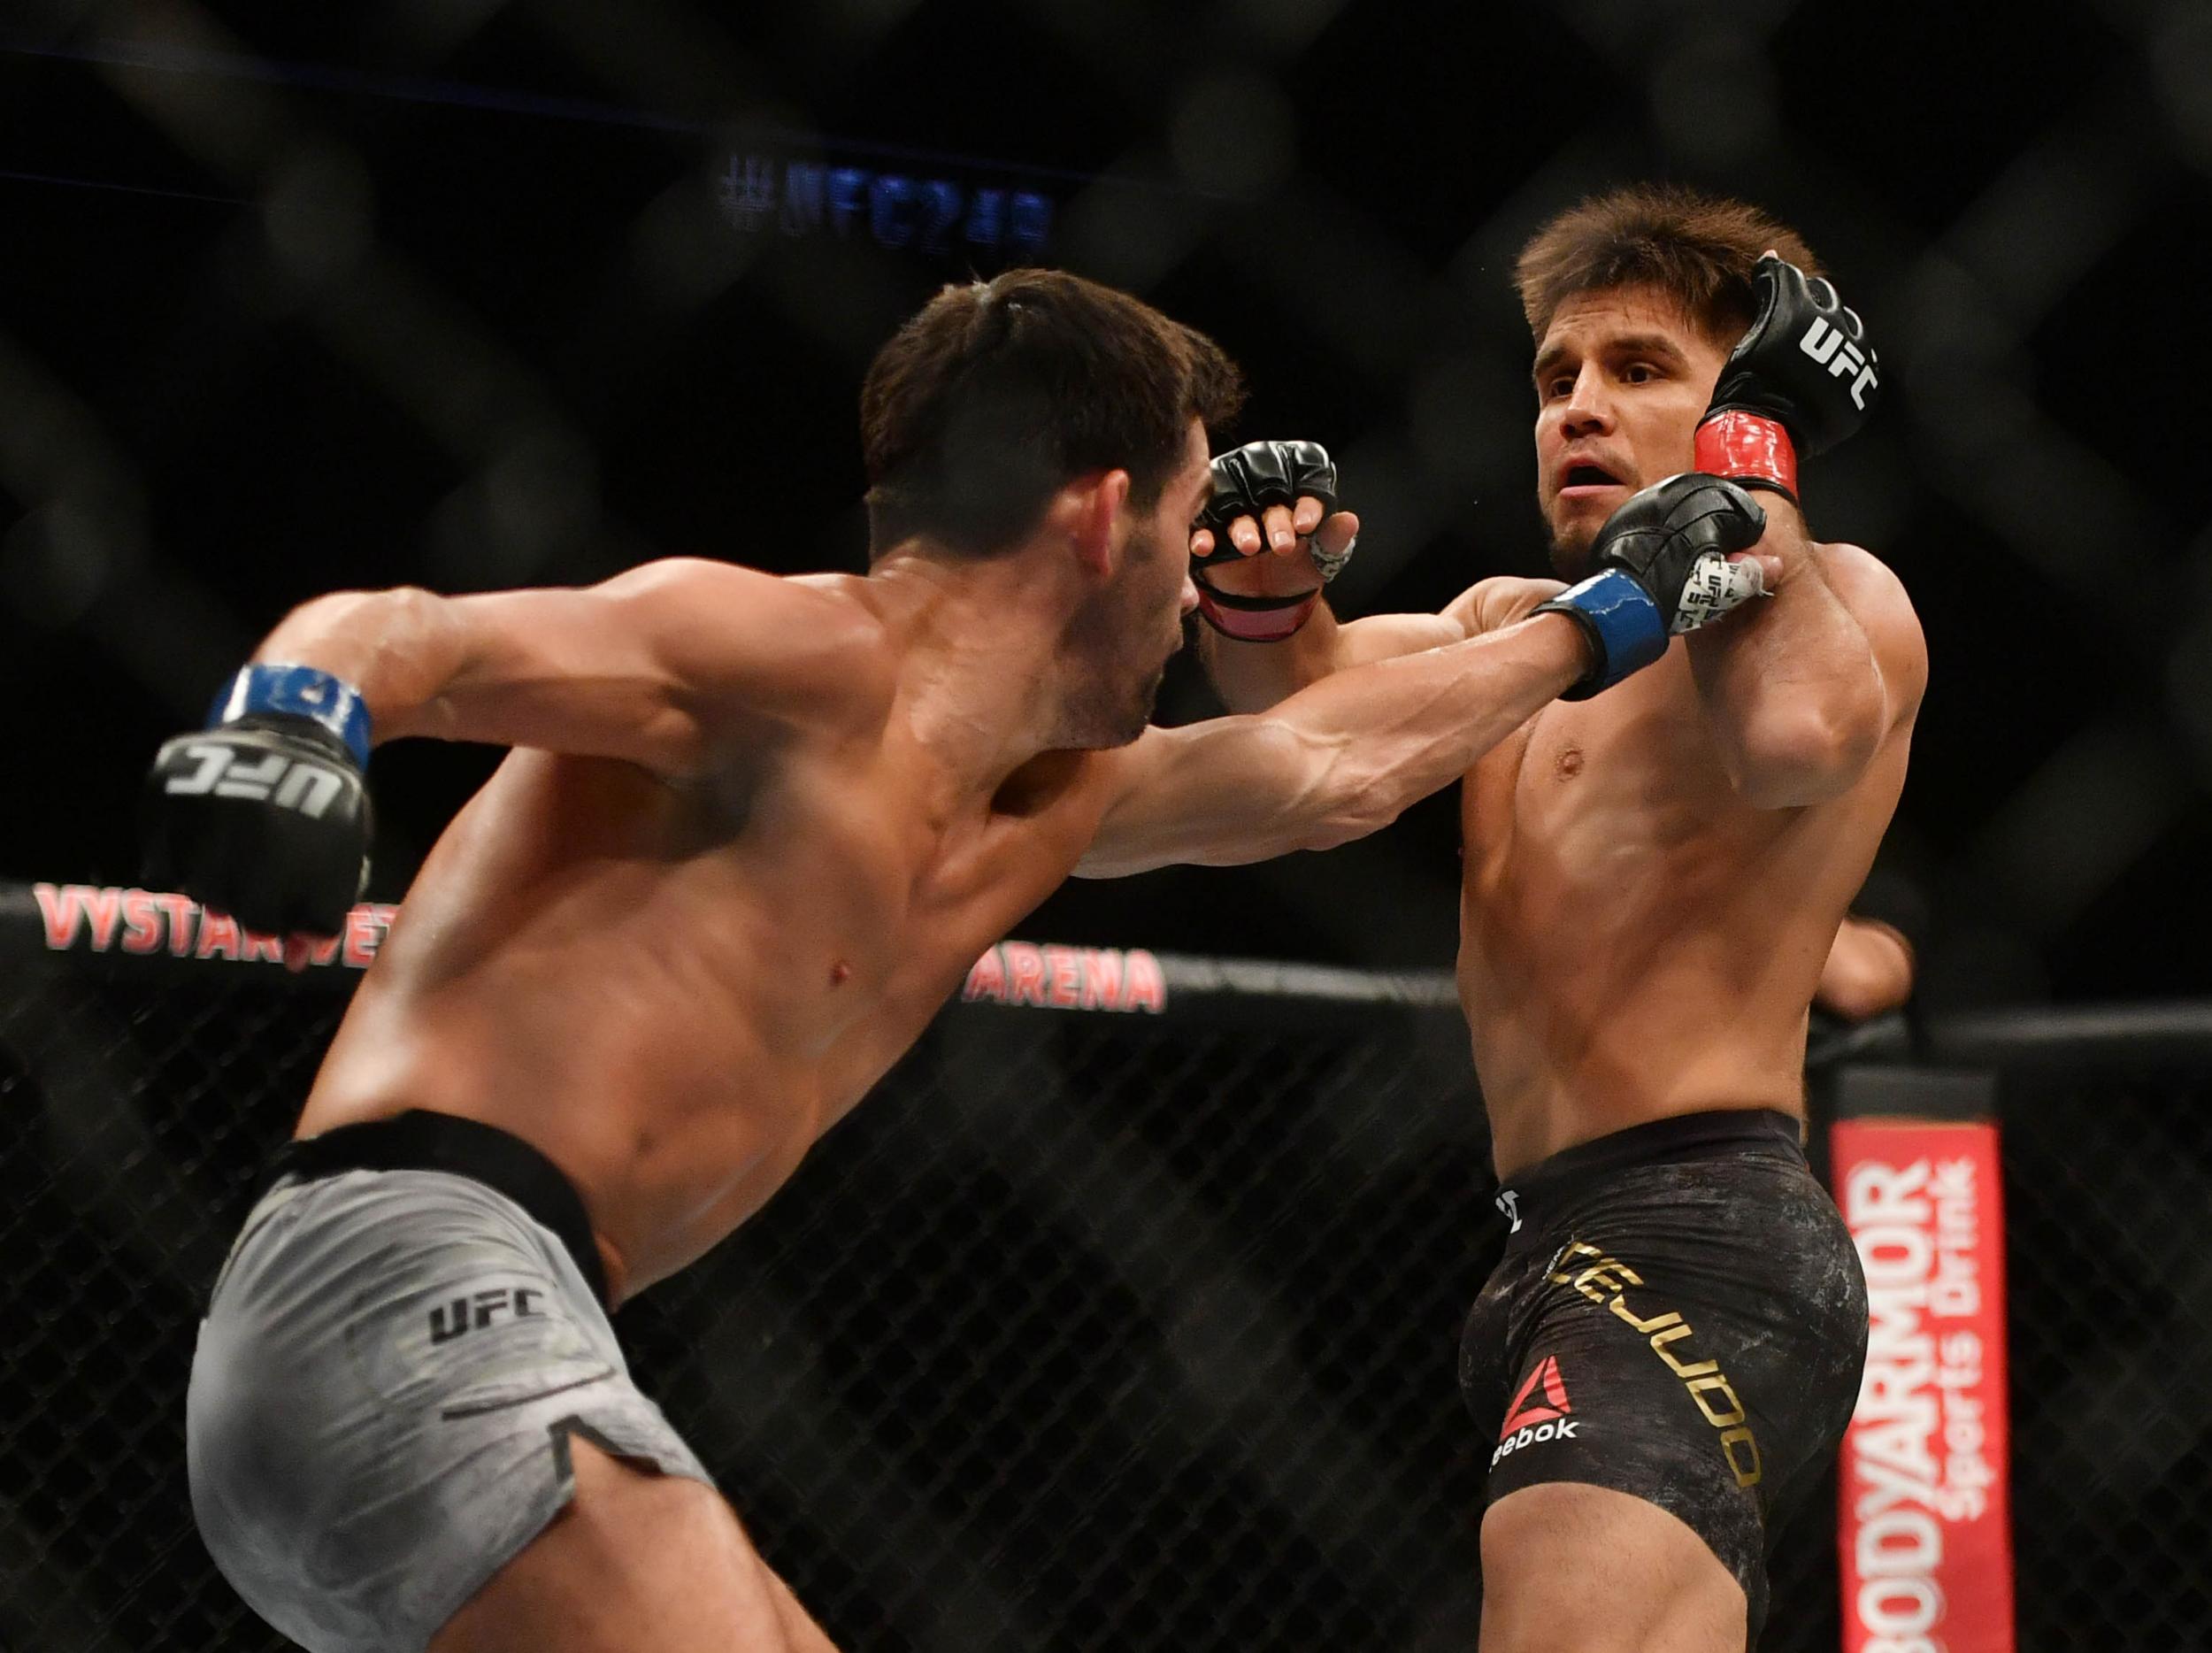 Cejudo appeared to retire from the sport after his win